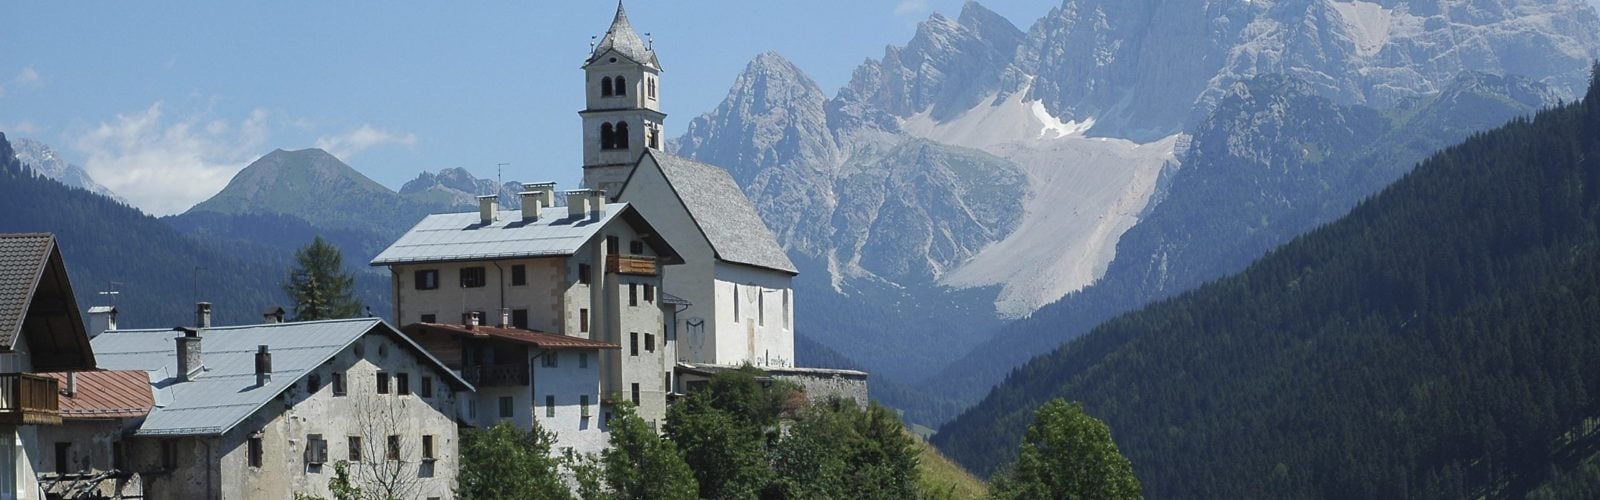 Colle Santa Lucia nestled in the lush green forests with the snow-capped Dolomites in the background, Belluno Italy